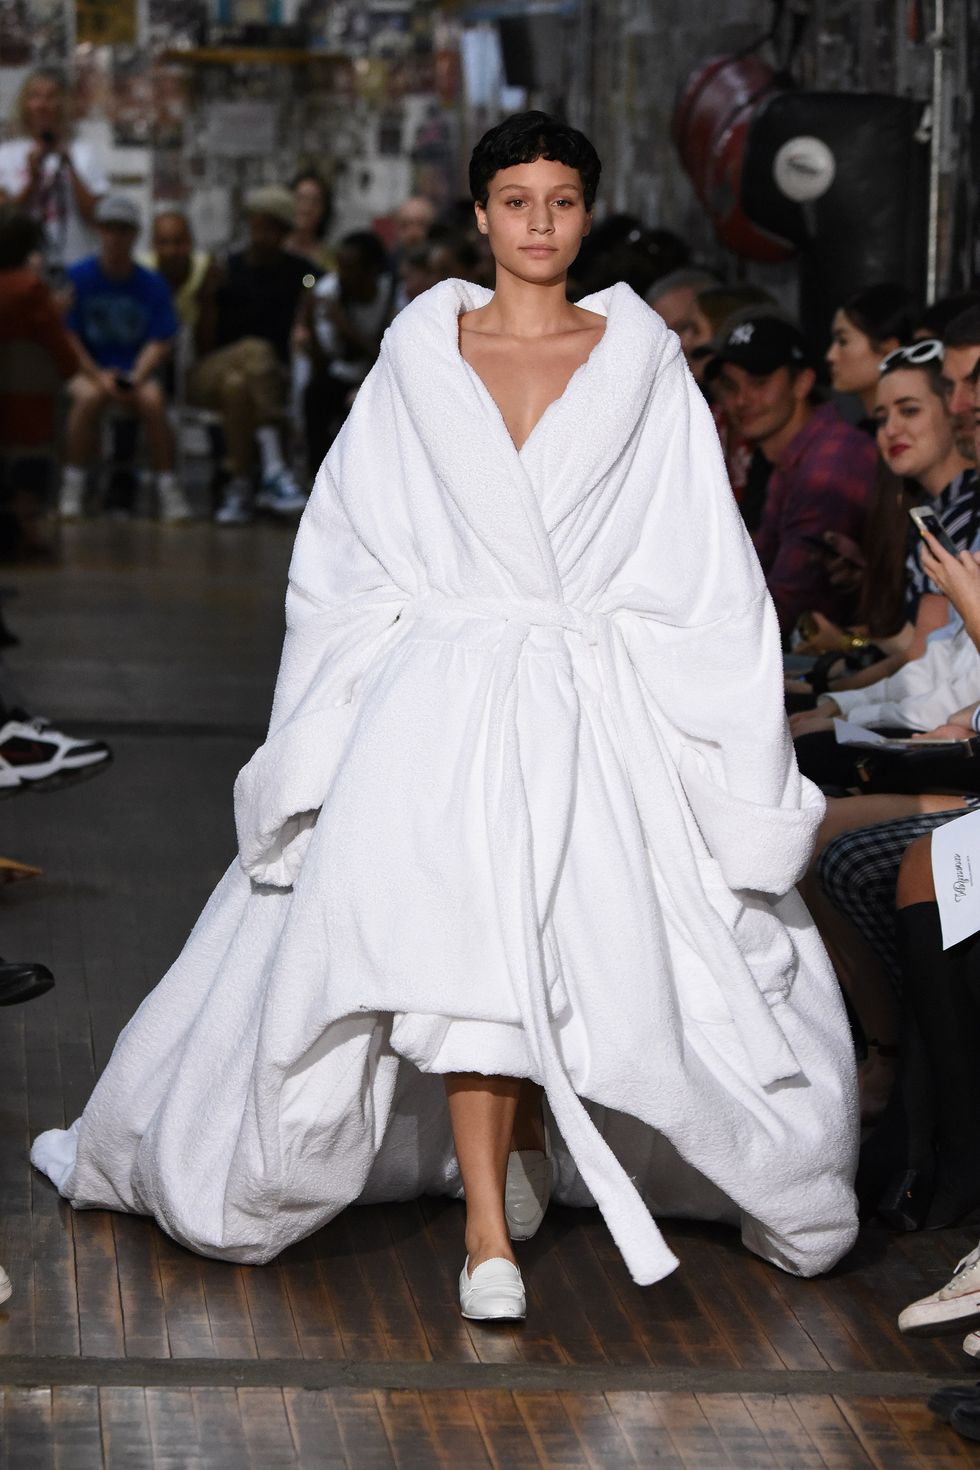 Dressing gown on the catwalk